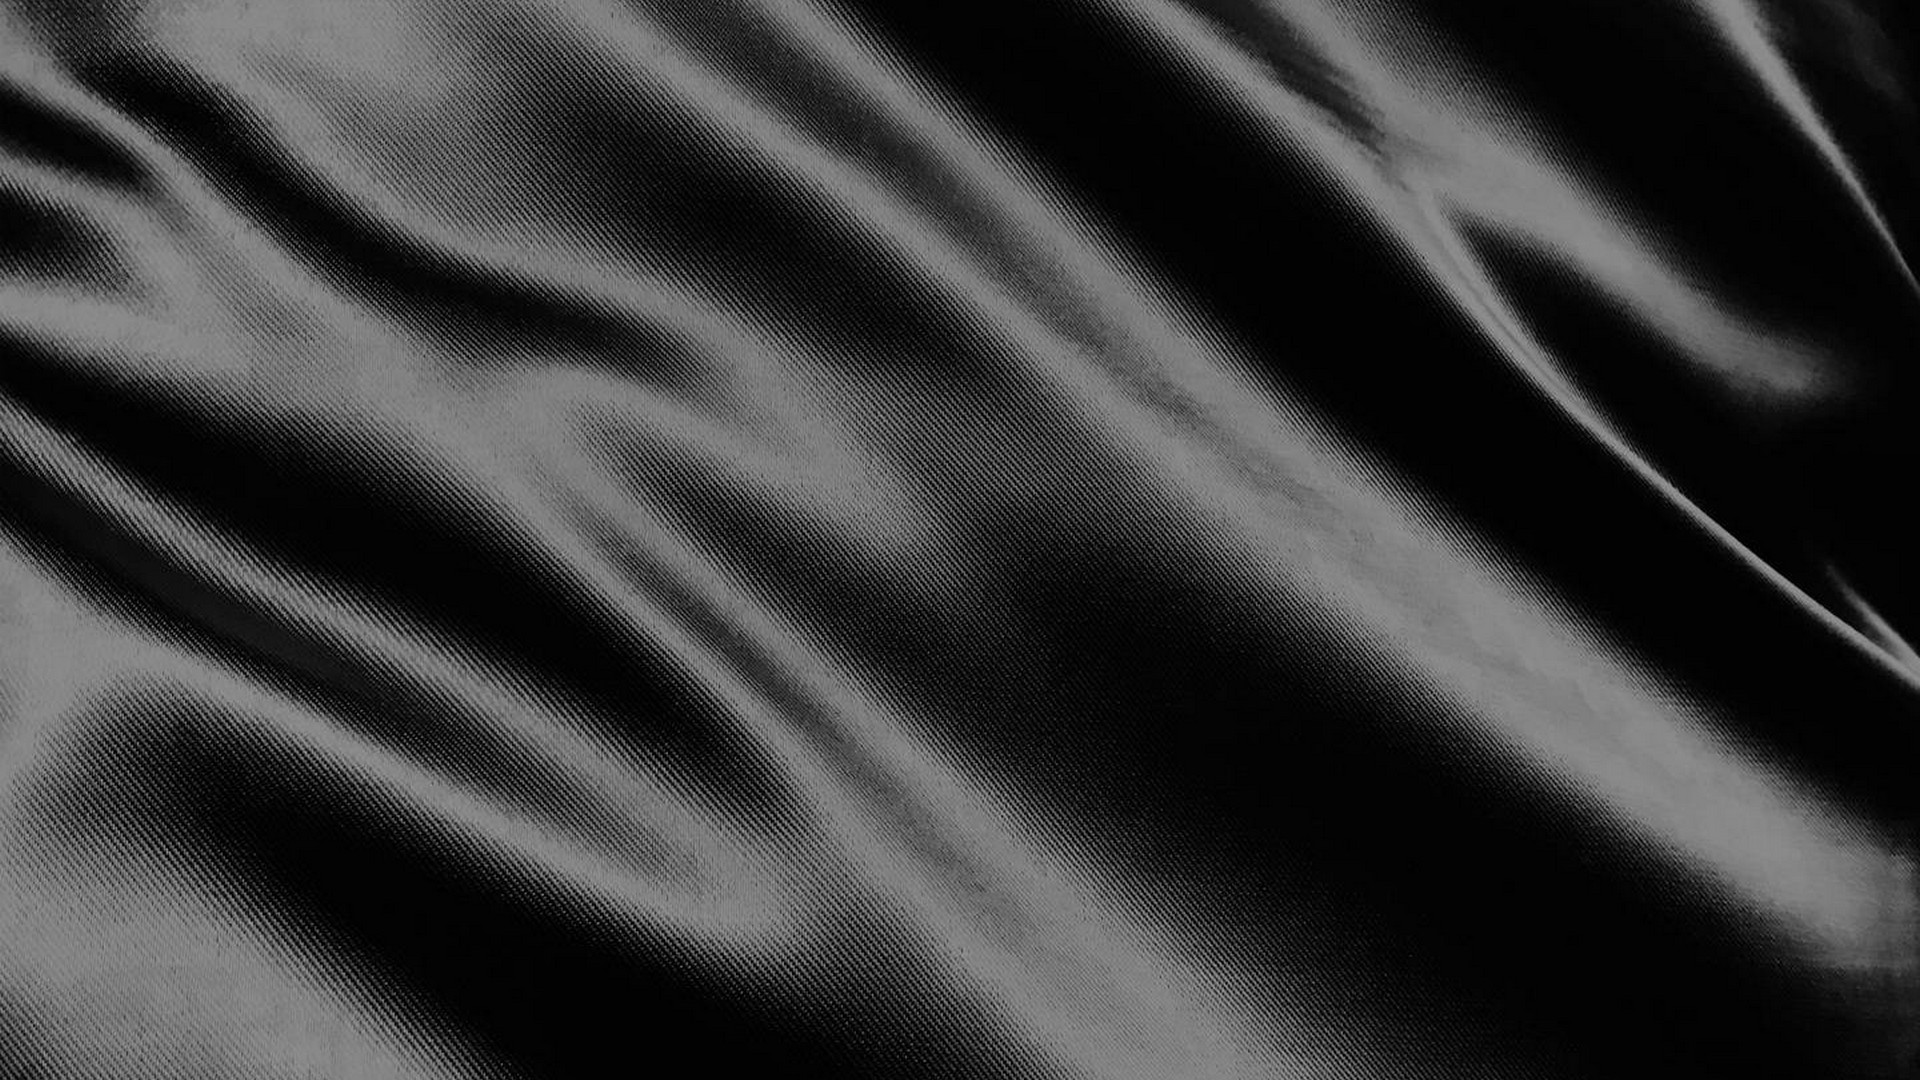 Black Silk Wallpaper For Desktop with high-resolution 1920x1080 pixel. You can use this wallpaper for your Windows and Mac OS computers as well as your Android and iPhone smartphones